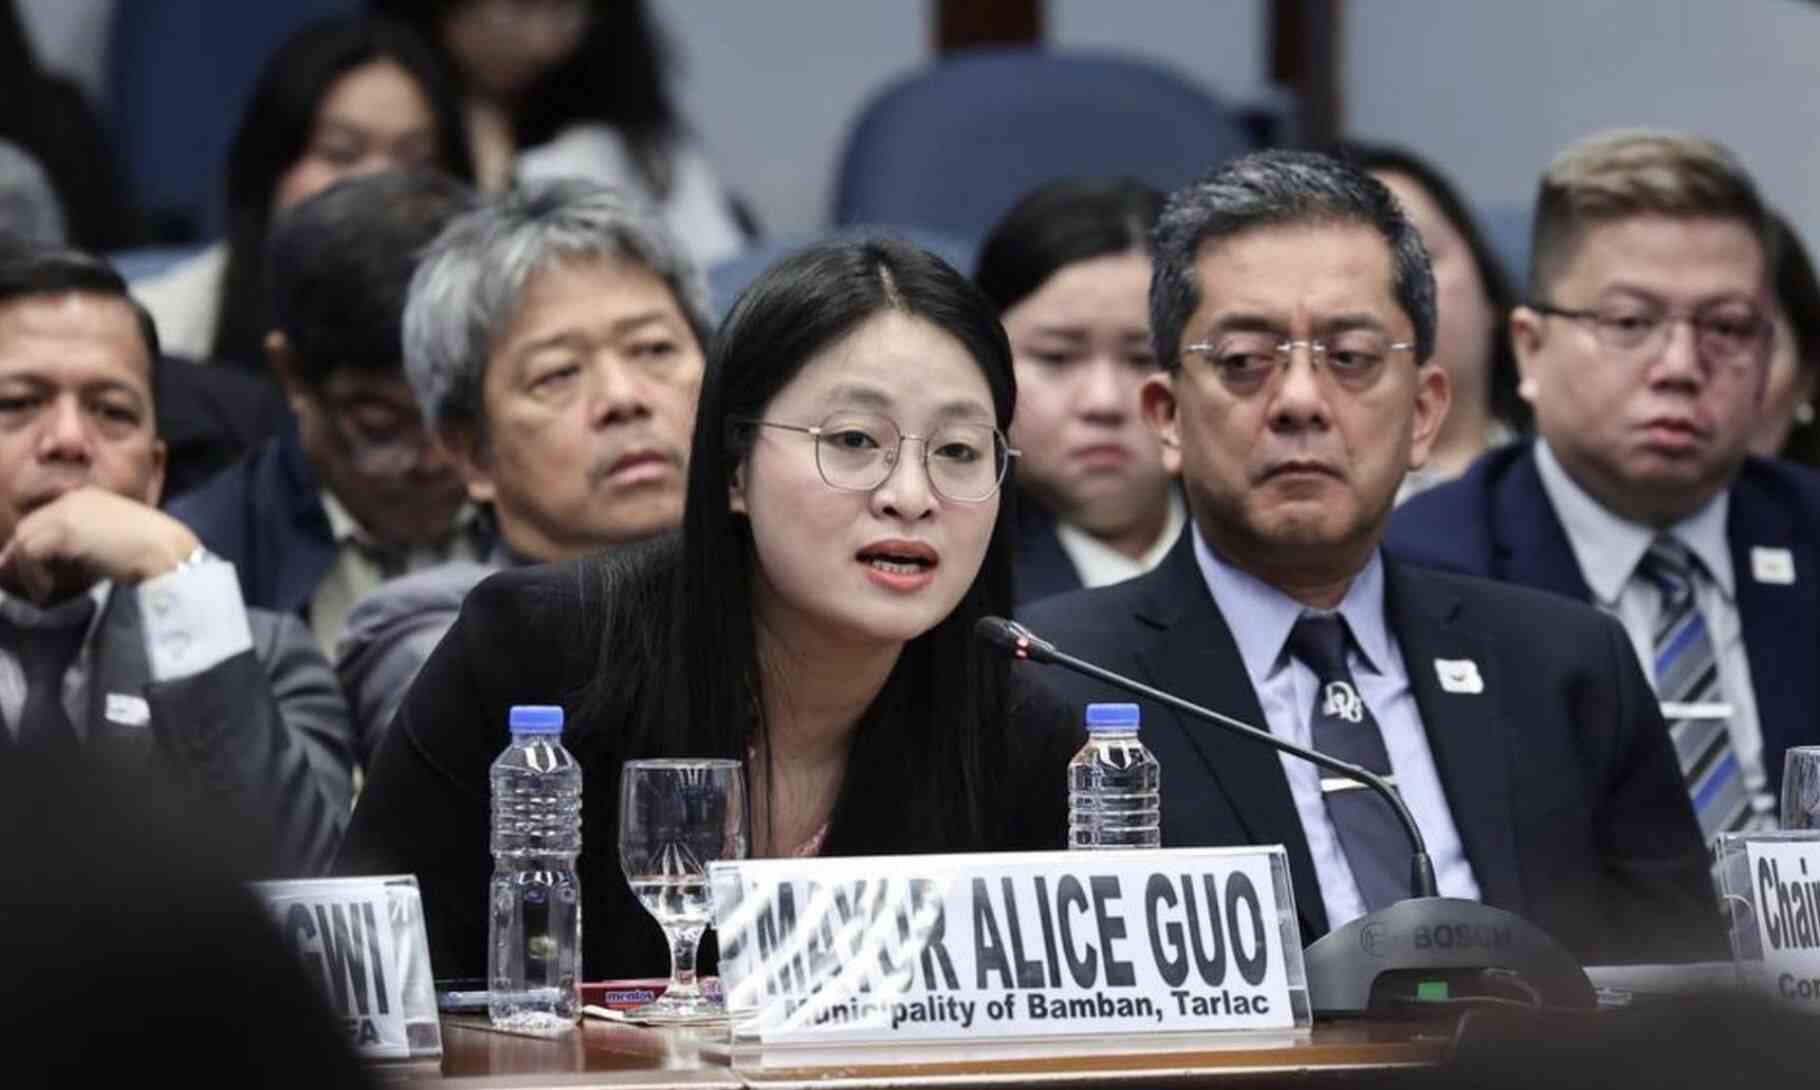 Philippine Senate Orders Arrest Of Mayor Alice Guo Amid Alleged Chinese Syndicate Links